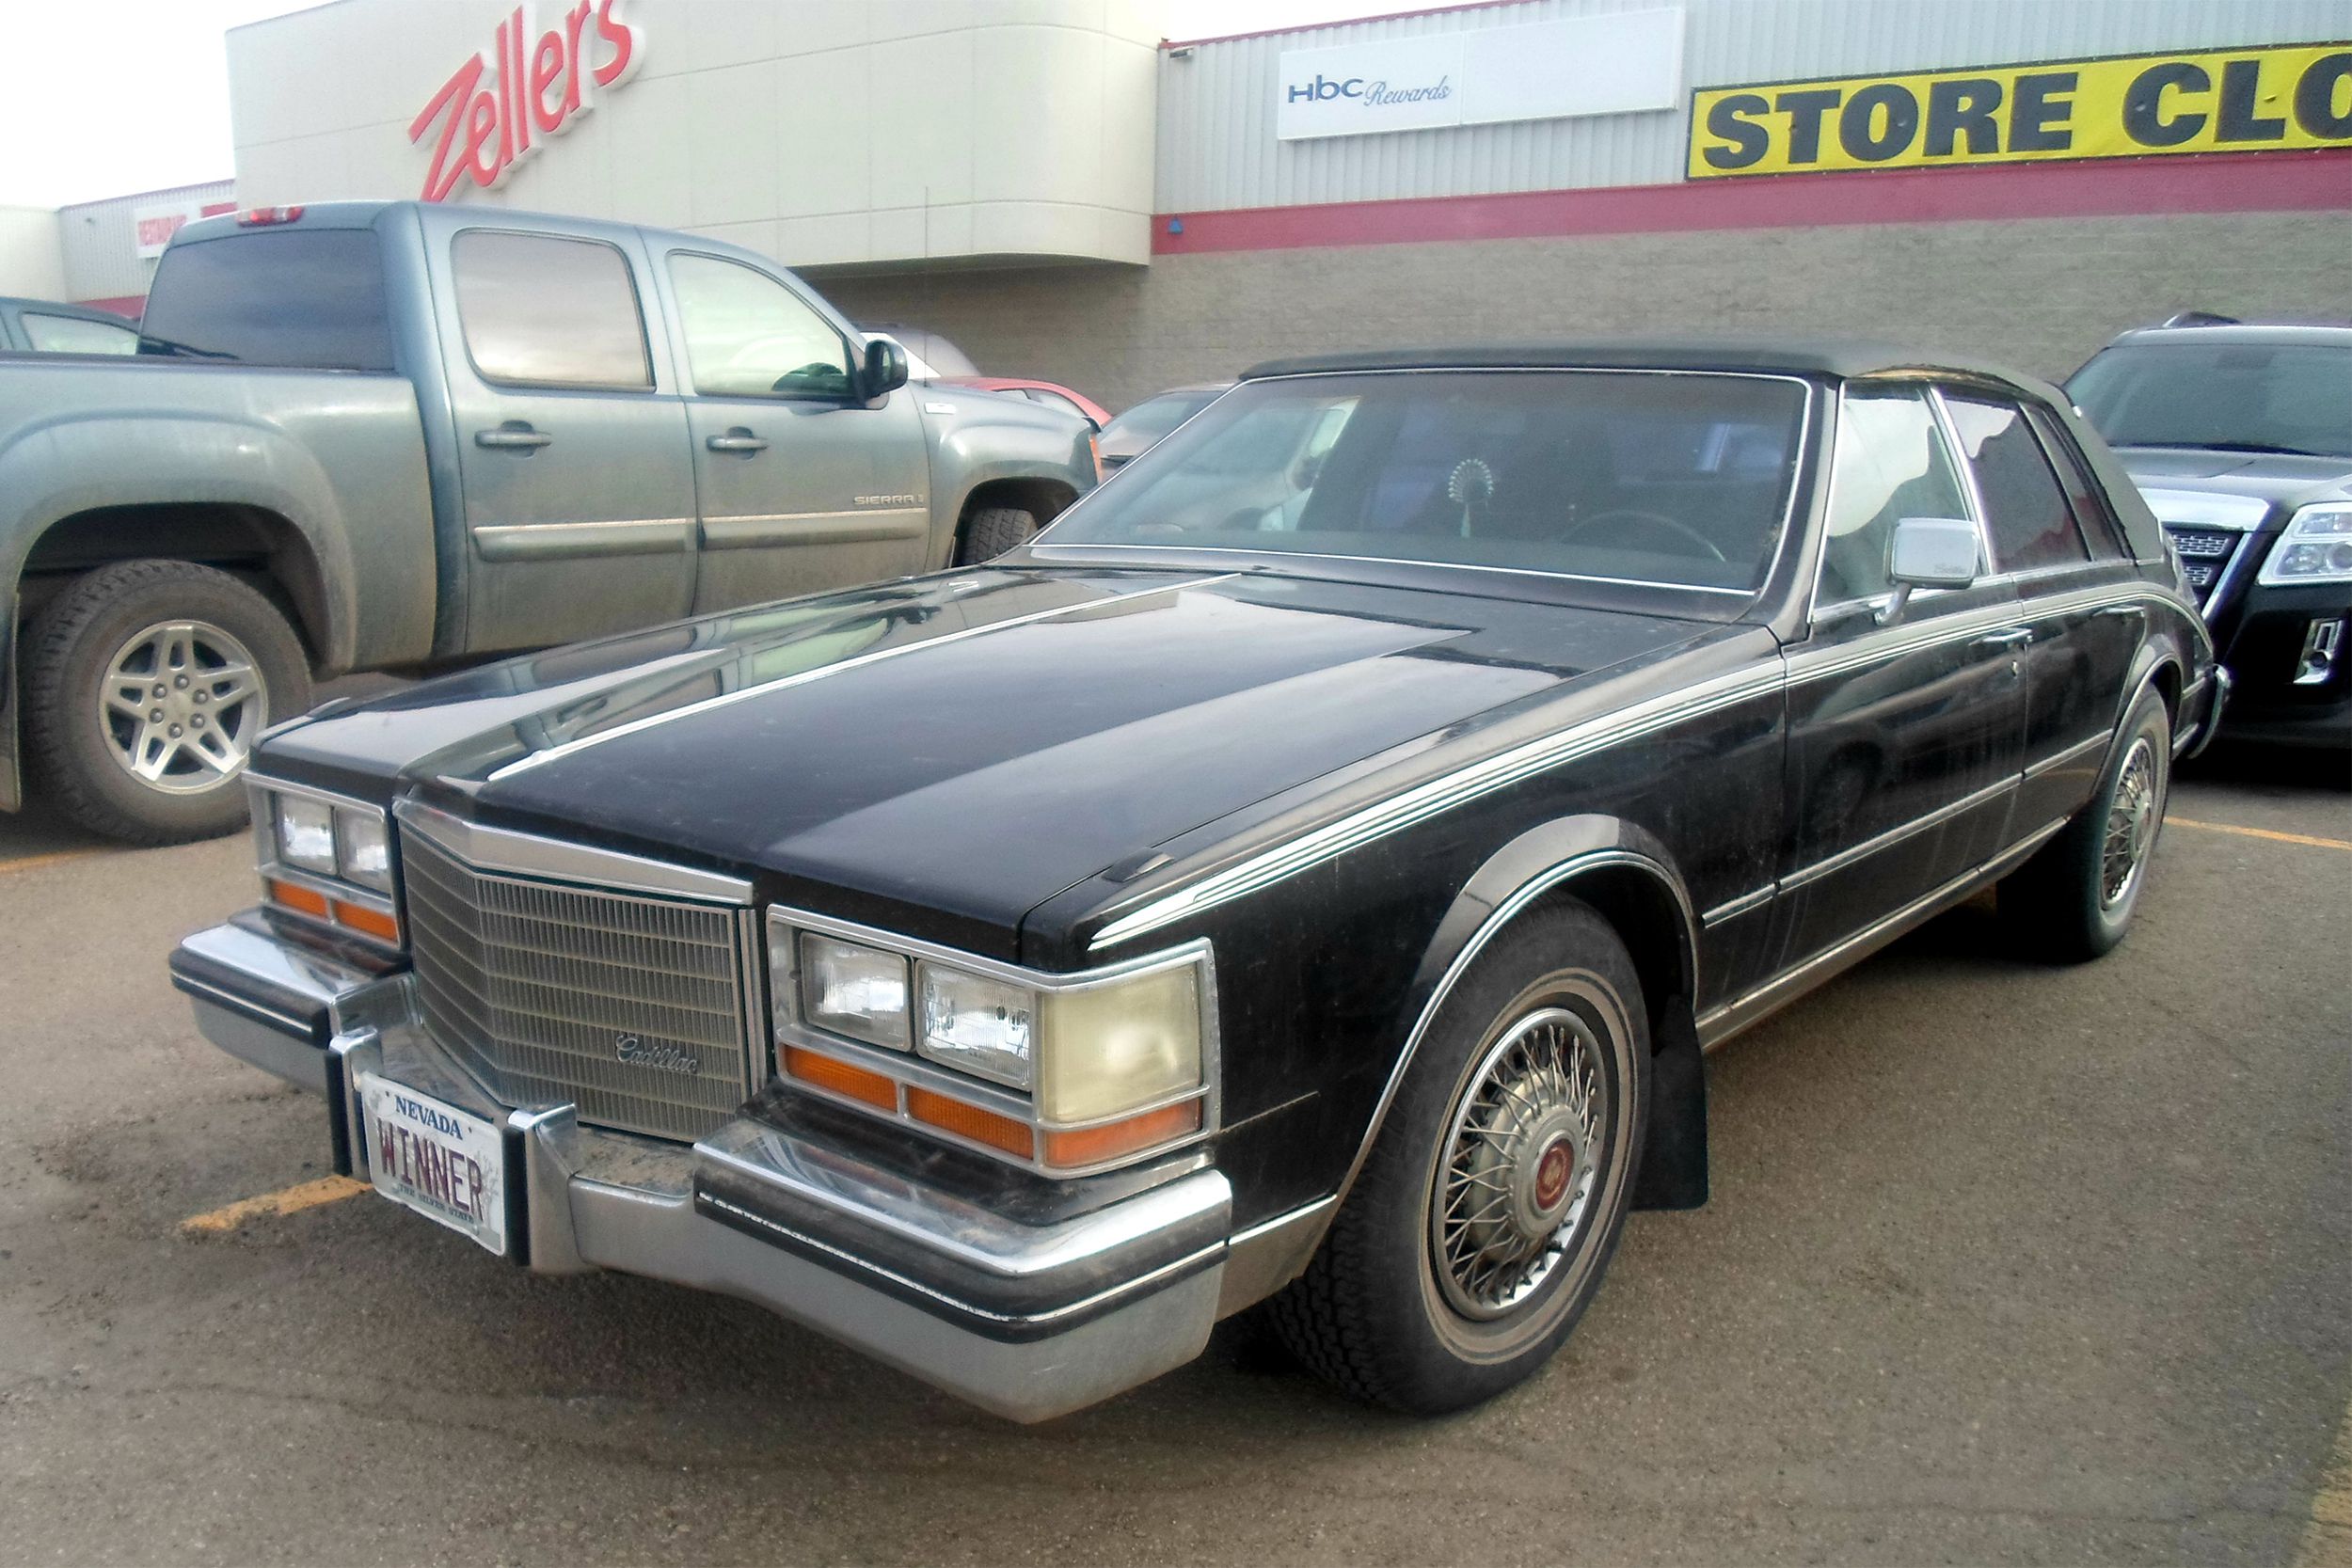 <p>The redesigned Cadillac Seville was supposed to help GM make news by marking the start of the '80s in head-turning style. It did make news and it certainly got people to look, if only to do a double-take when they realized just how ugly a Caddy could be. Designed with a retro "bustle back," the new Seville notched disappointing sales, likely because the <a href="http://www.curbsideclassic.com/curbside-classics-american/curbside-classic-1980-cadillac-seville-gms-deadly-sin-no-17-from-halo-to-pitchfork/">engine was just as bad as the design</a>. "A near-perfect synthesis of wretched design and ruinous engineering," Curbside Classic concludes. Tell us how you really feel. </p>